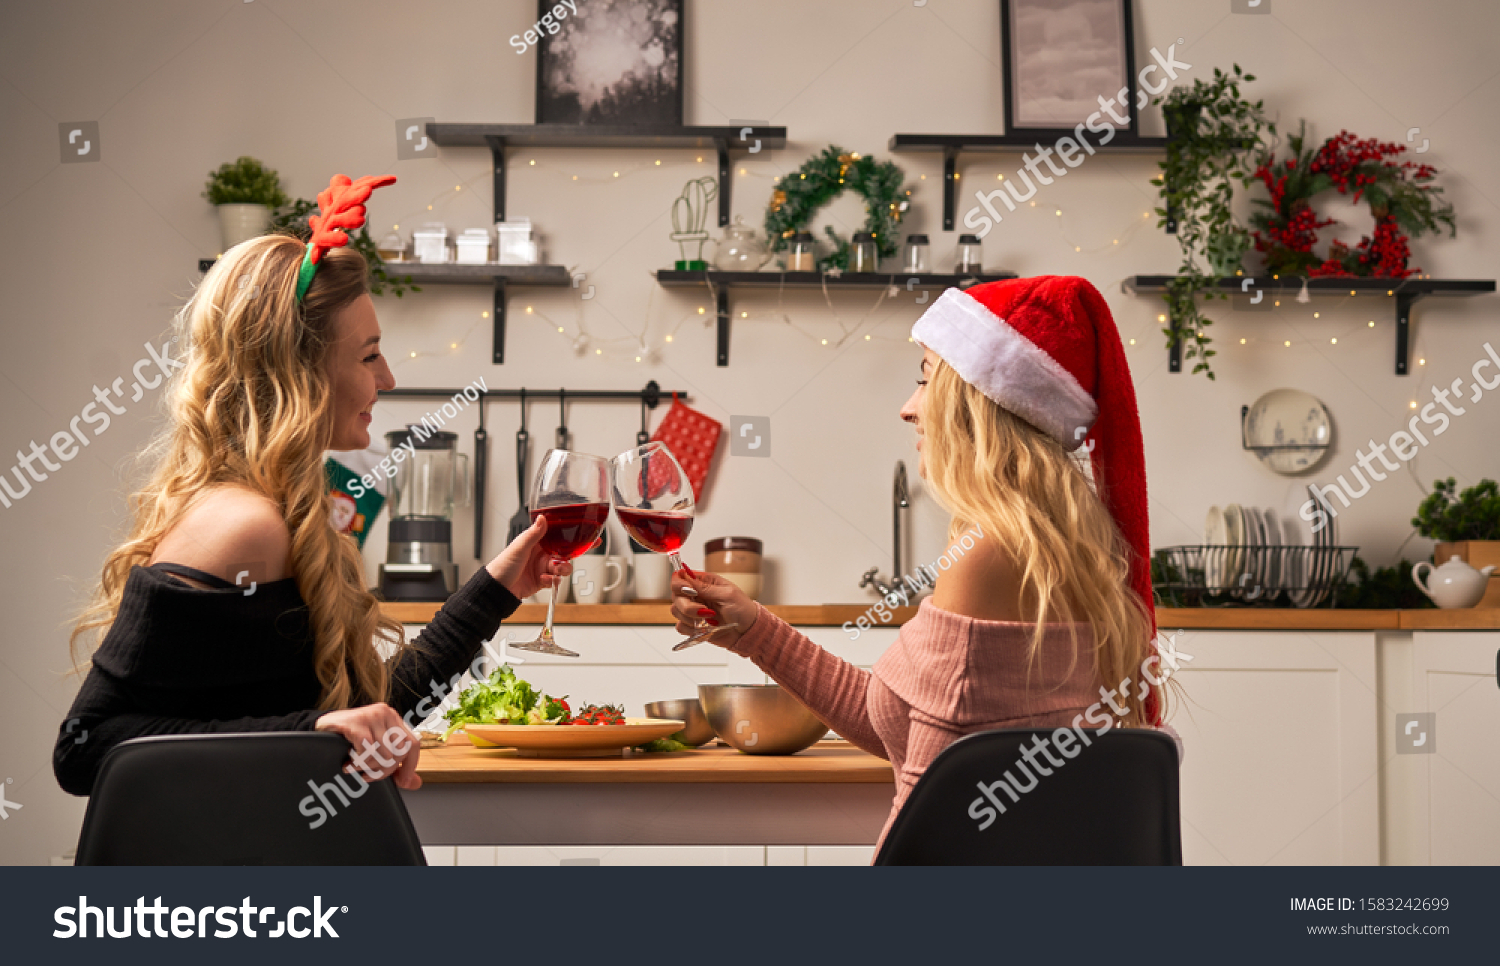 Two women sitting at festive table with wine glasses in kitchen at Christmas. #1583242699